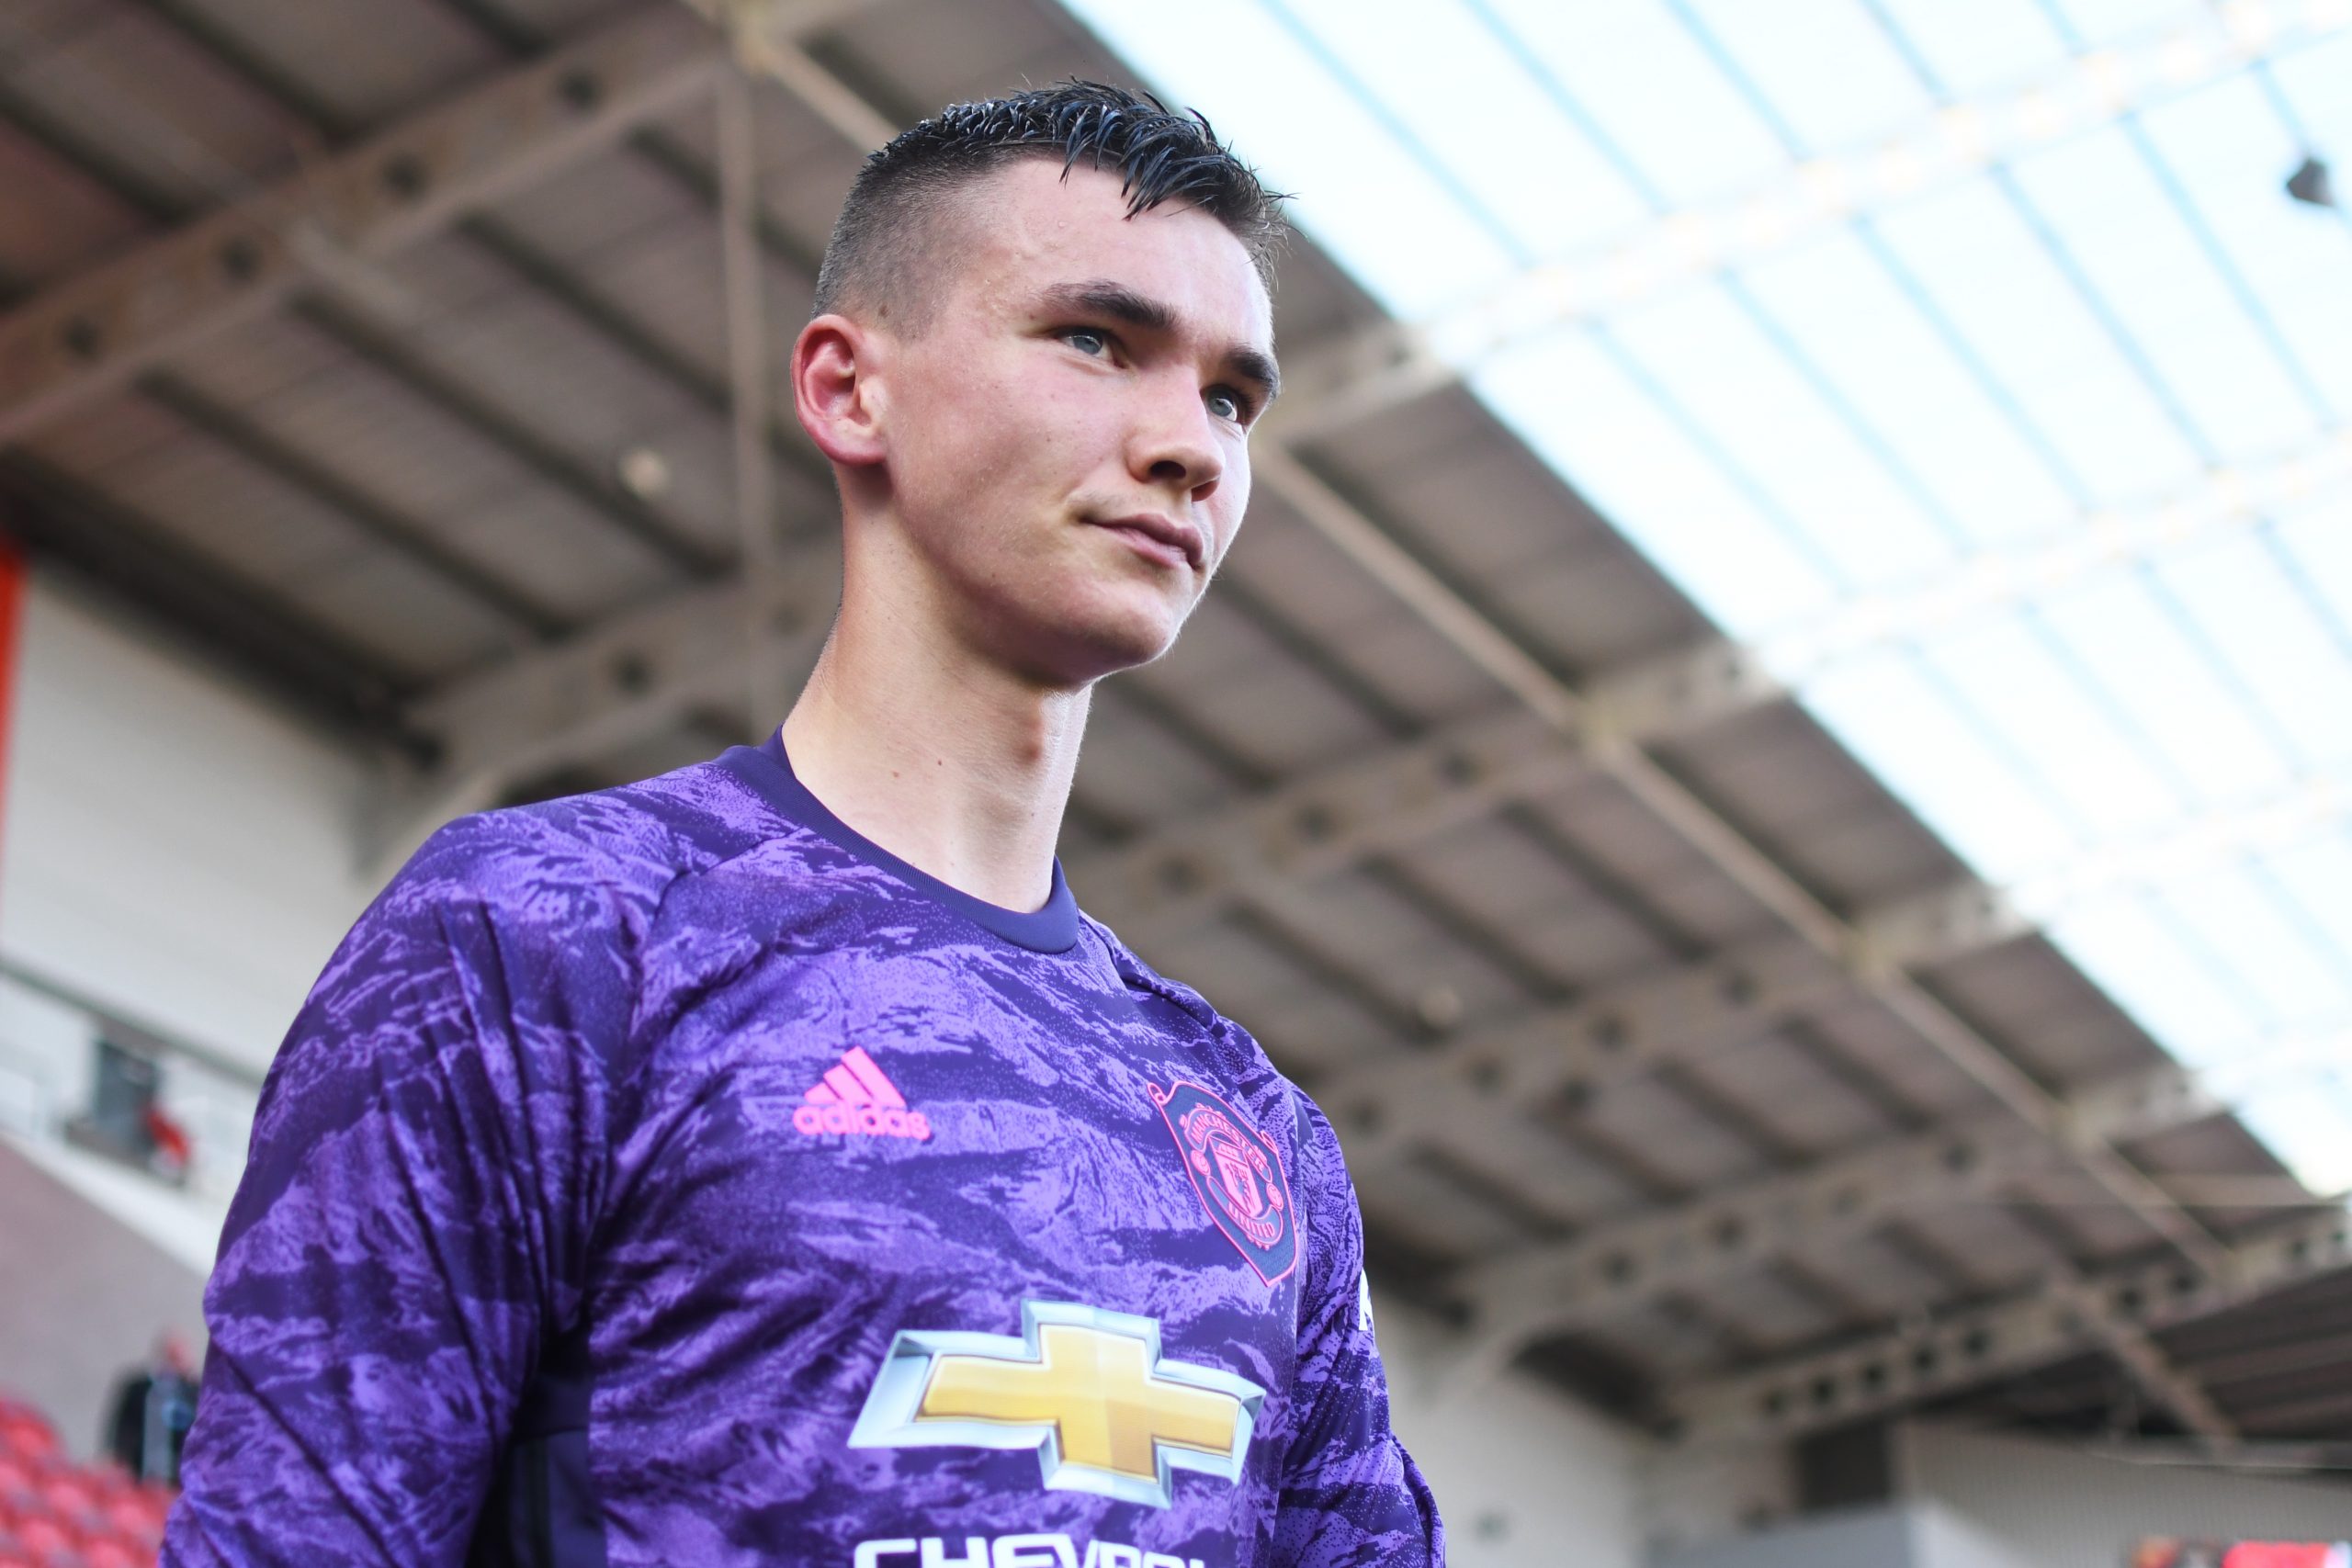 ROTHERHAM, ENGLAND - AUGUST 06: Matej Kovar of Manchester United U21 during the EFL Trophy match between Rotherham United and Manchester United U21 at AESSEAL New York Stadium on August 6, 2019 in Rotherham, England. (Photo by George Wood/Getty Images)